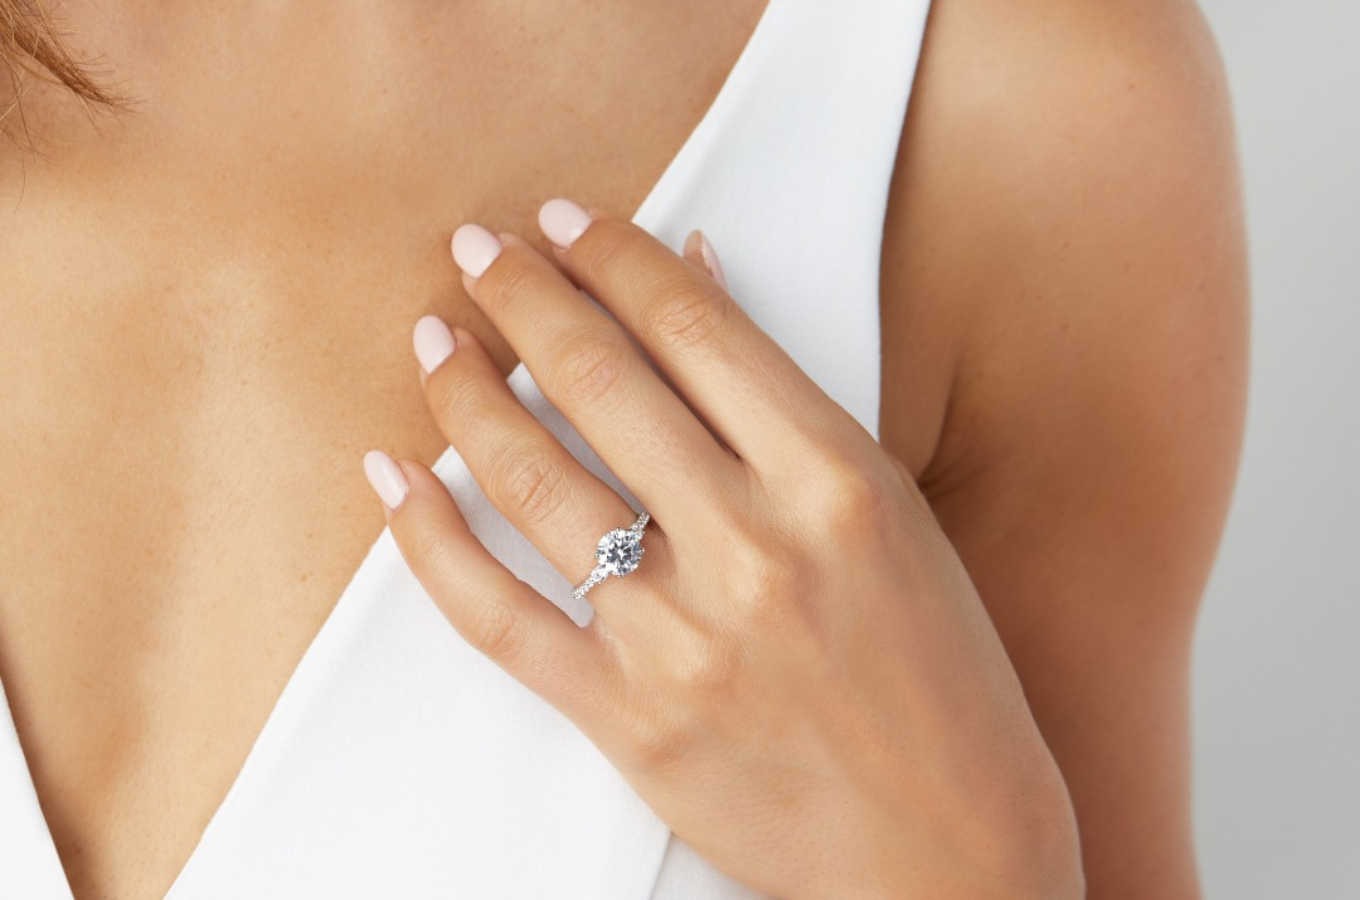 Shining Bright: Diamond Engagement Rings for Everyone at Alter's Gem Jewelry